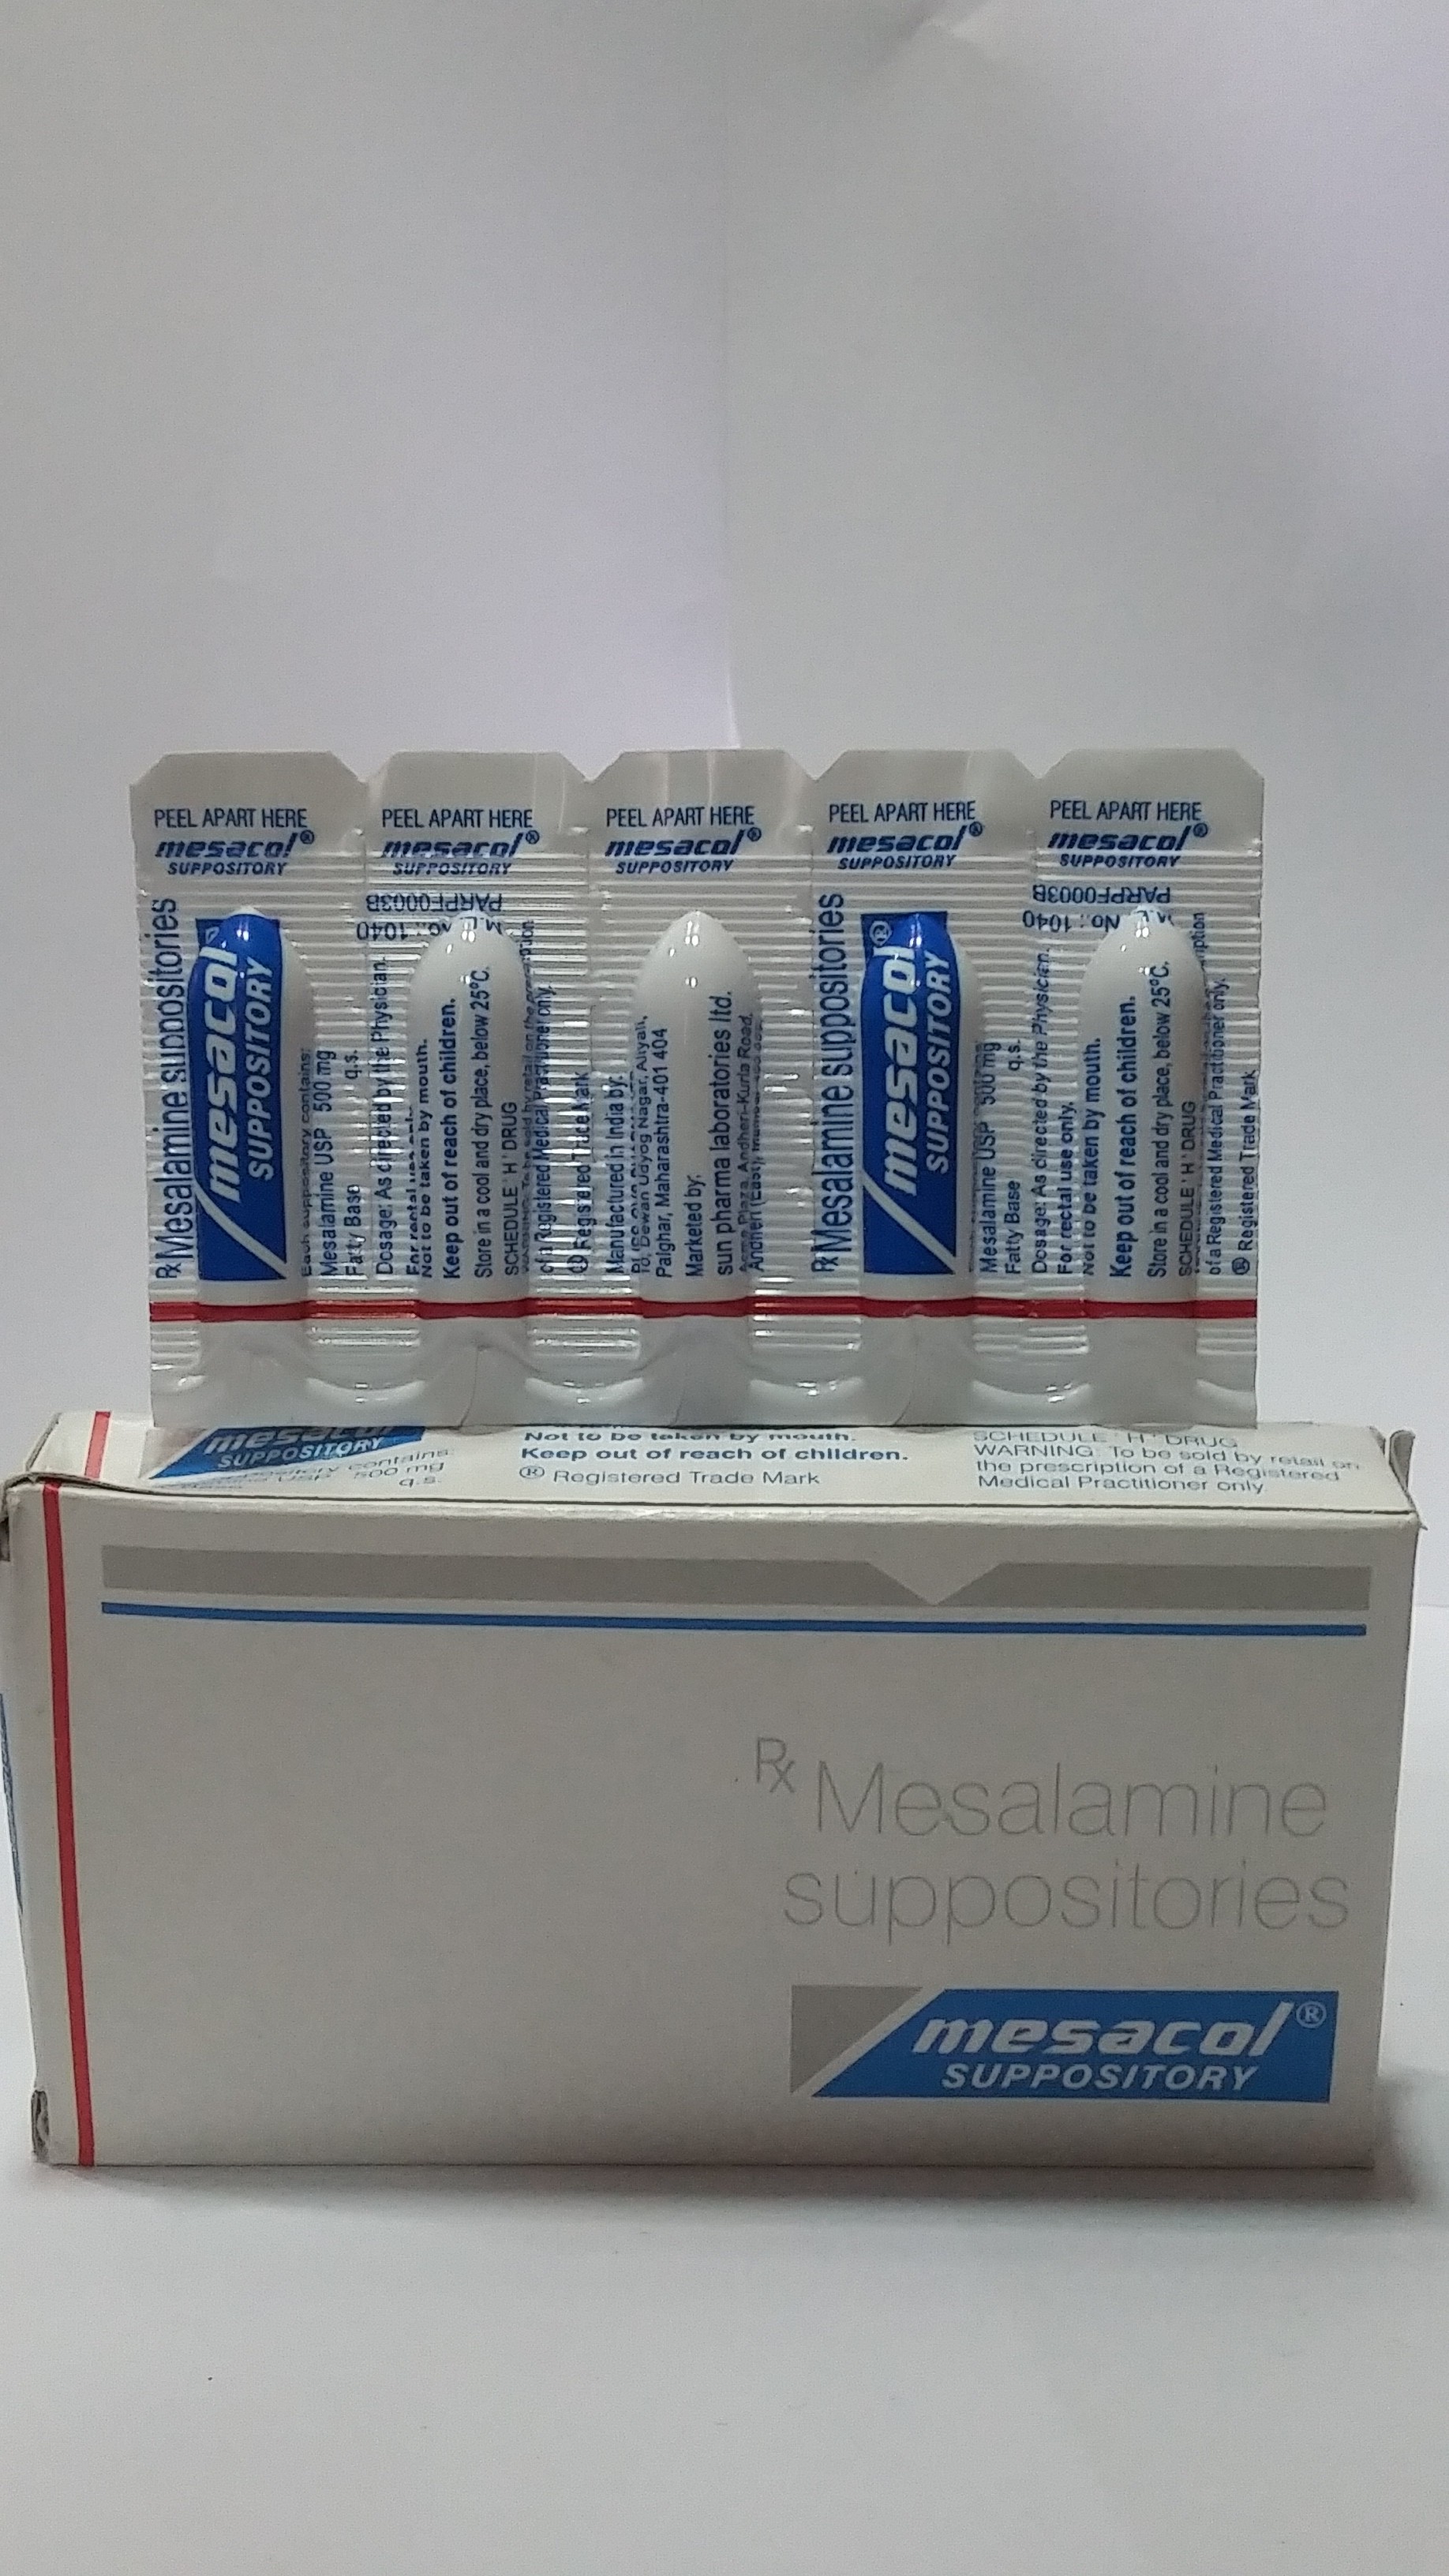 Mesacol Suppository 500mg.